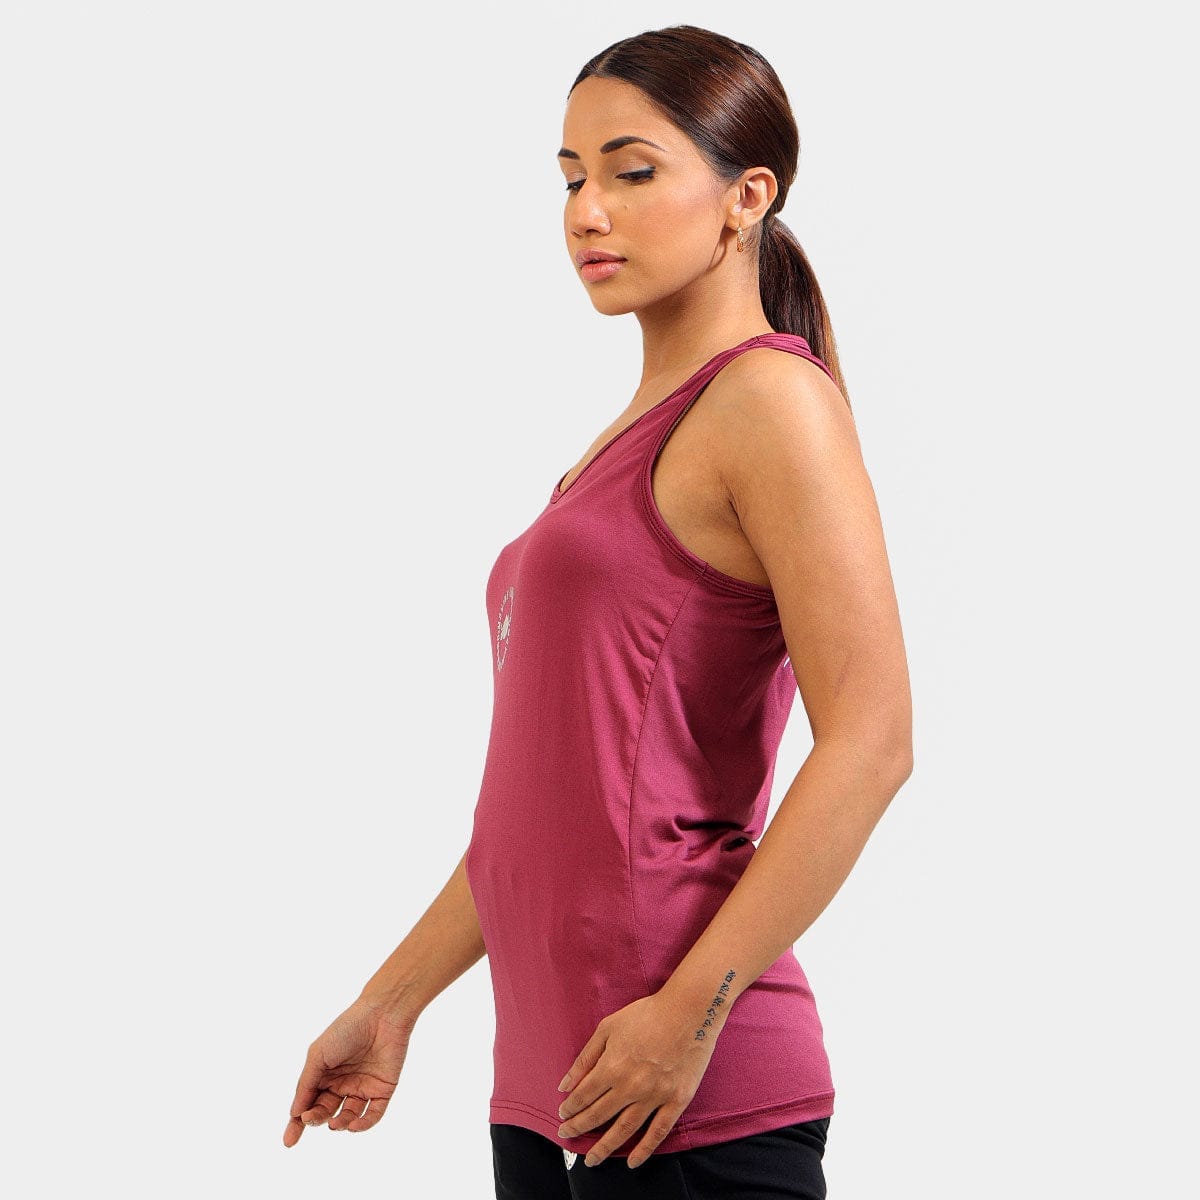 VELOCITY LONG TANK TOP - The Orion Fit